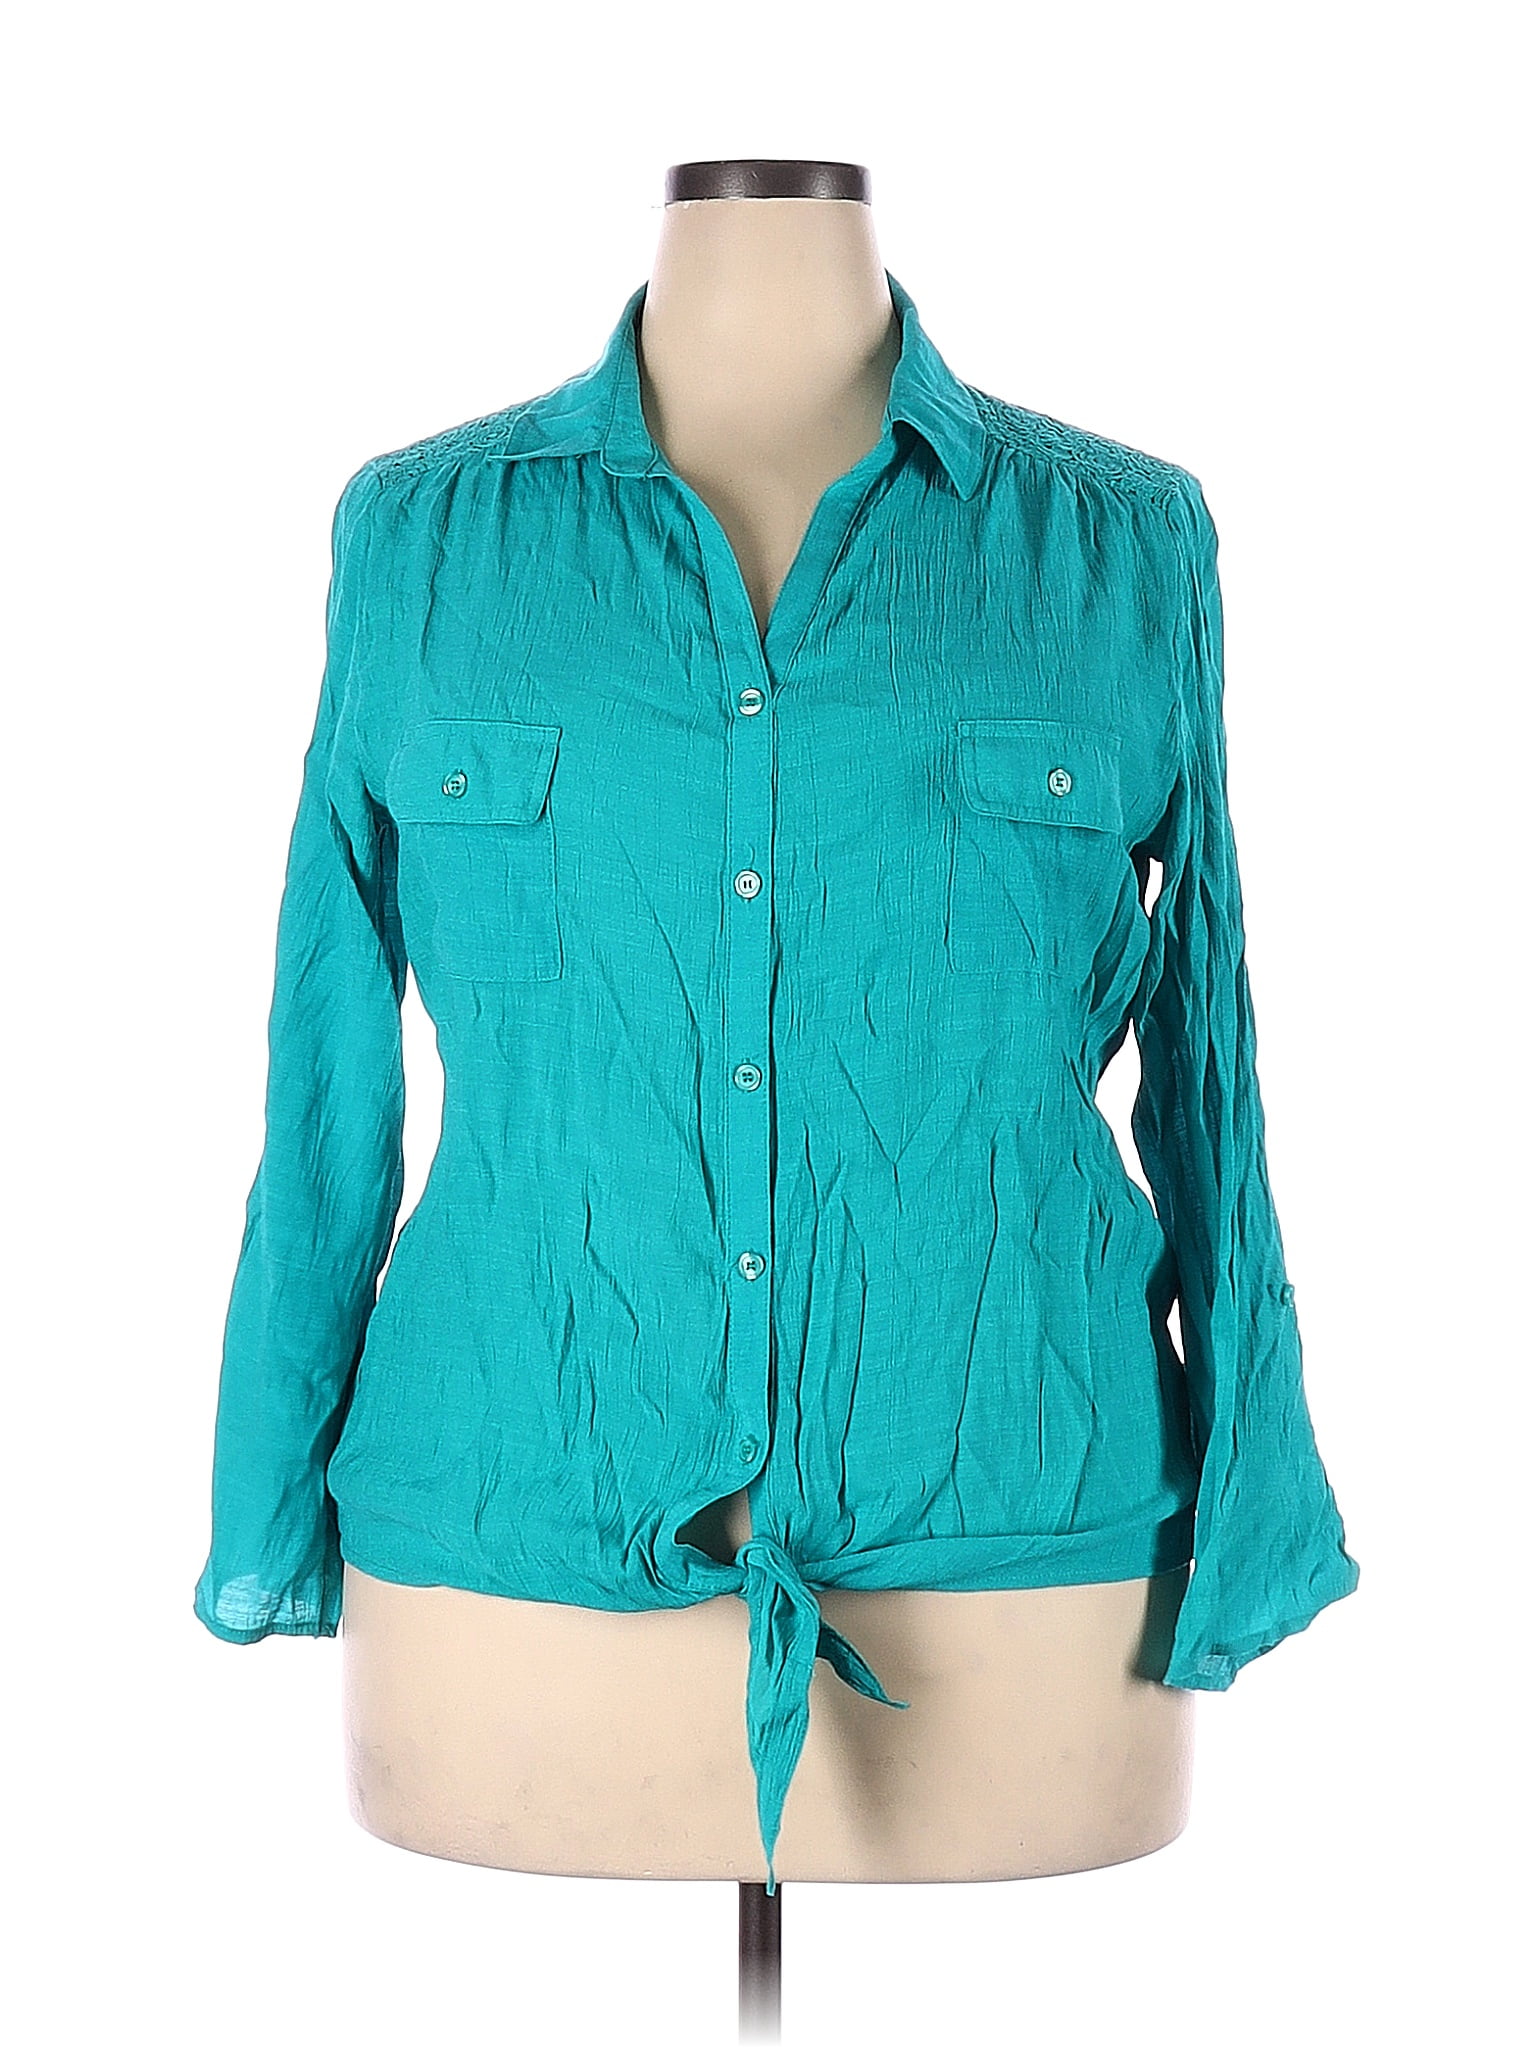 Westbound Checkered-gingham Teal Long Sleeve Blouse Size 2X (Plus) - 62 ...